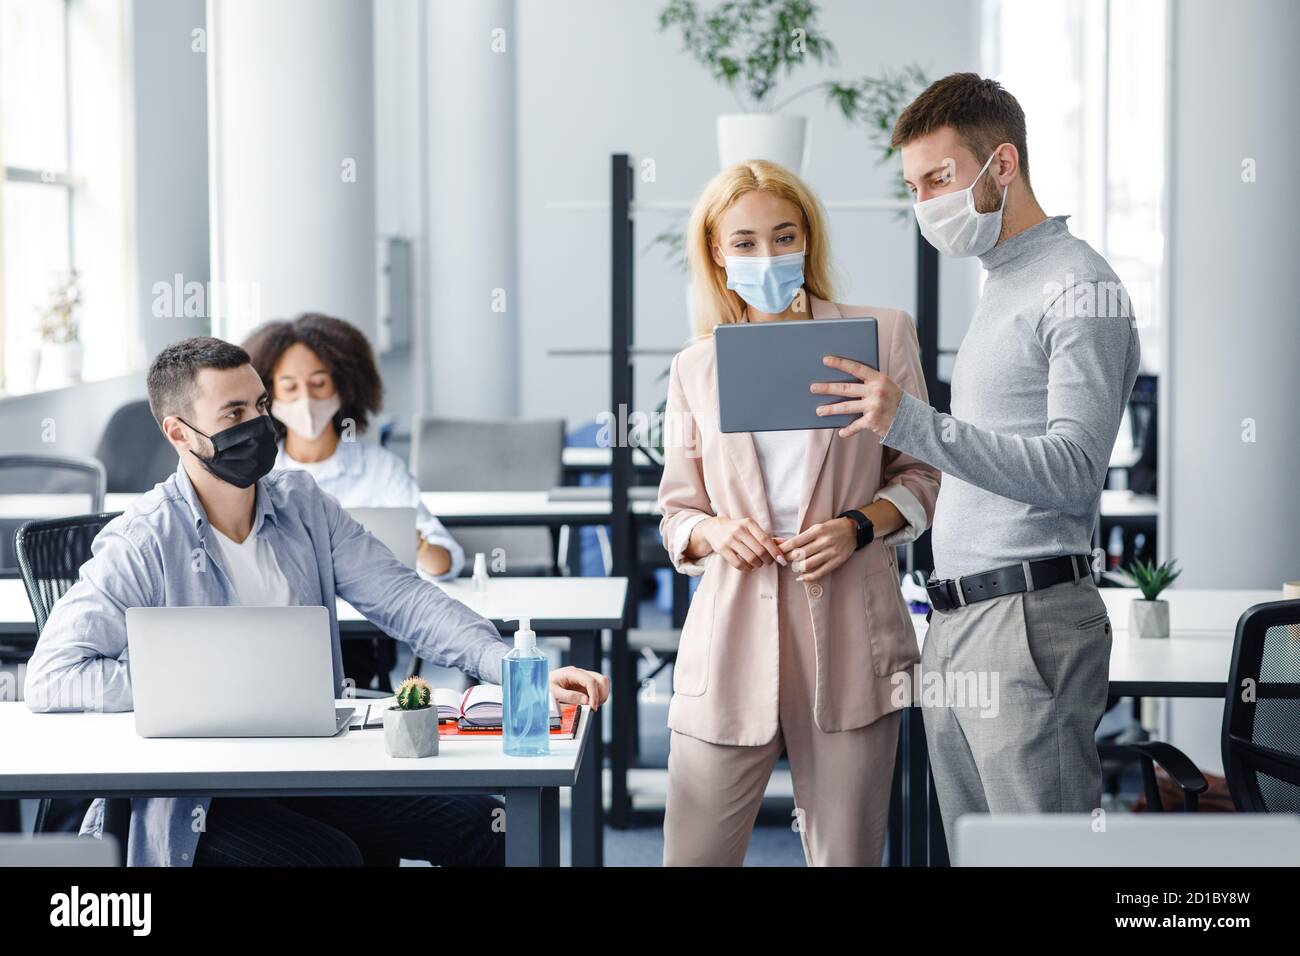 Teamwork in corporate company and social distance during coronavirus epidemic. Male manager in protective mask shows tablet to workers in interior Stock Photo